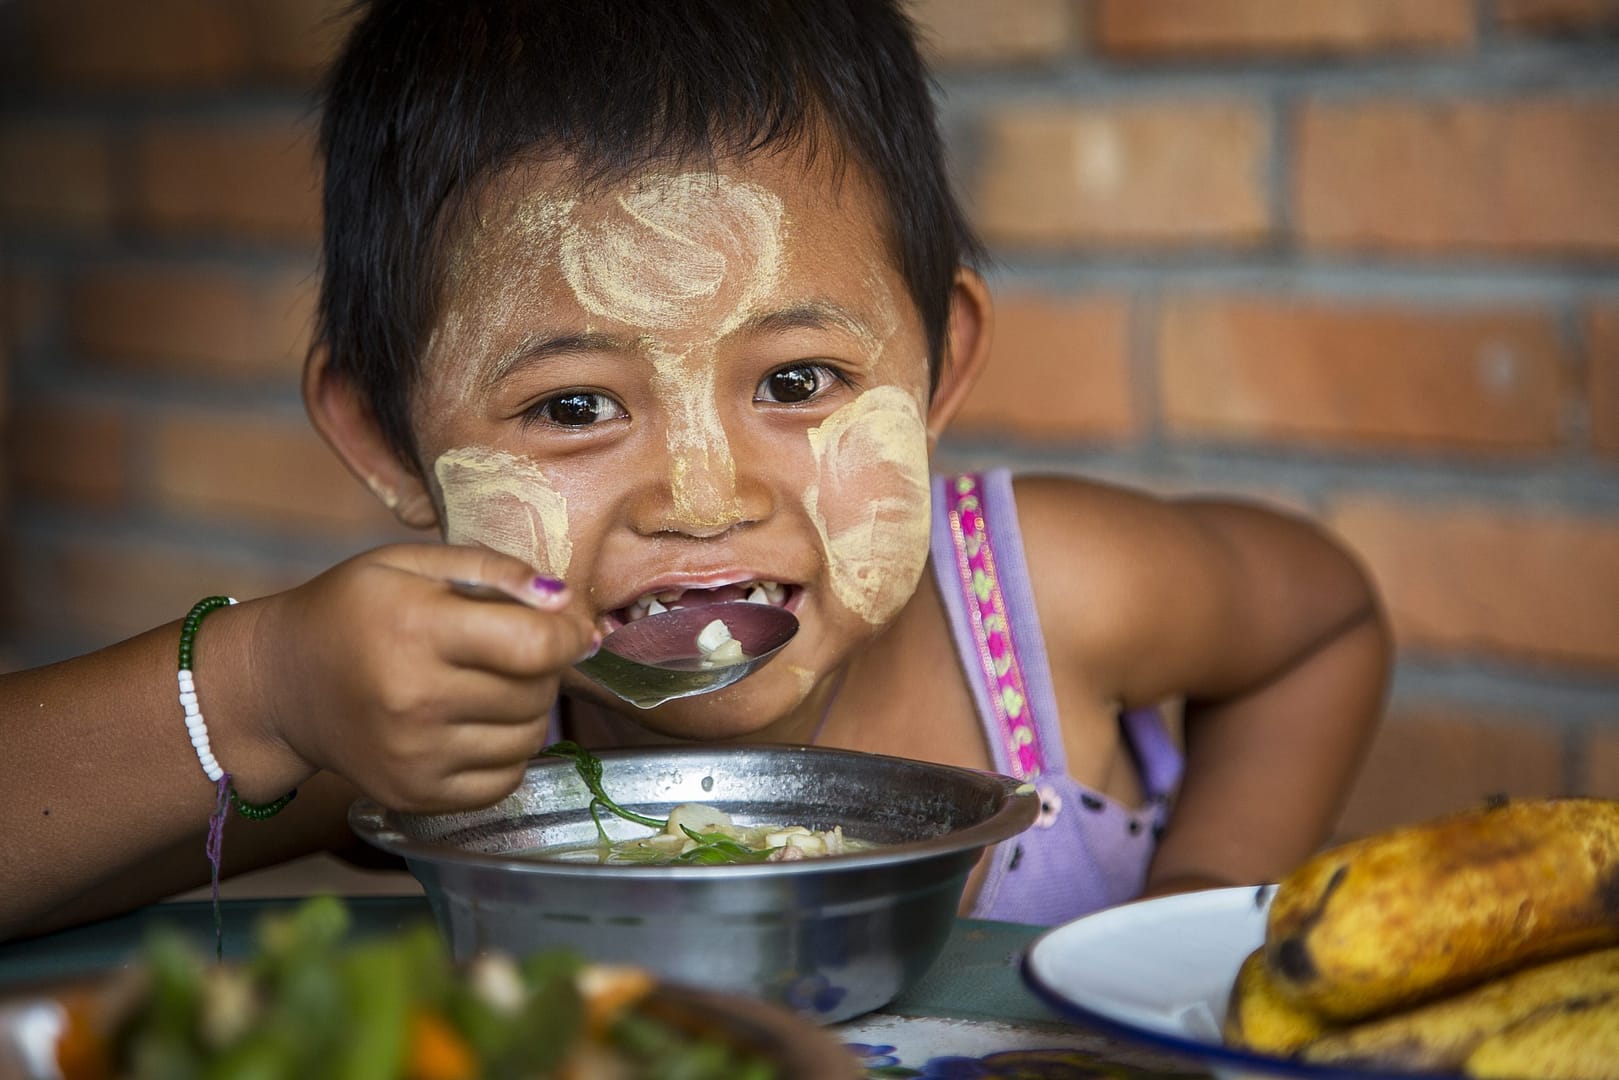 Young asian girl sits eating soup from a metal bowl.